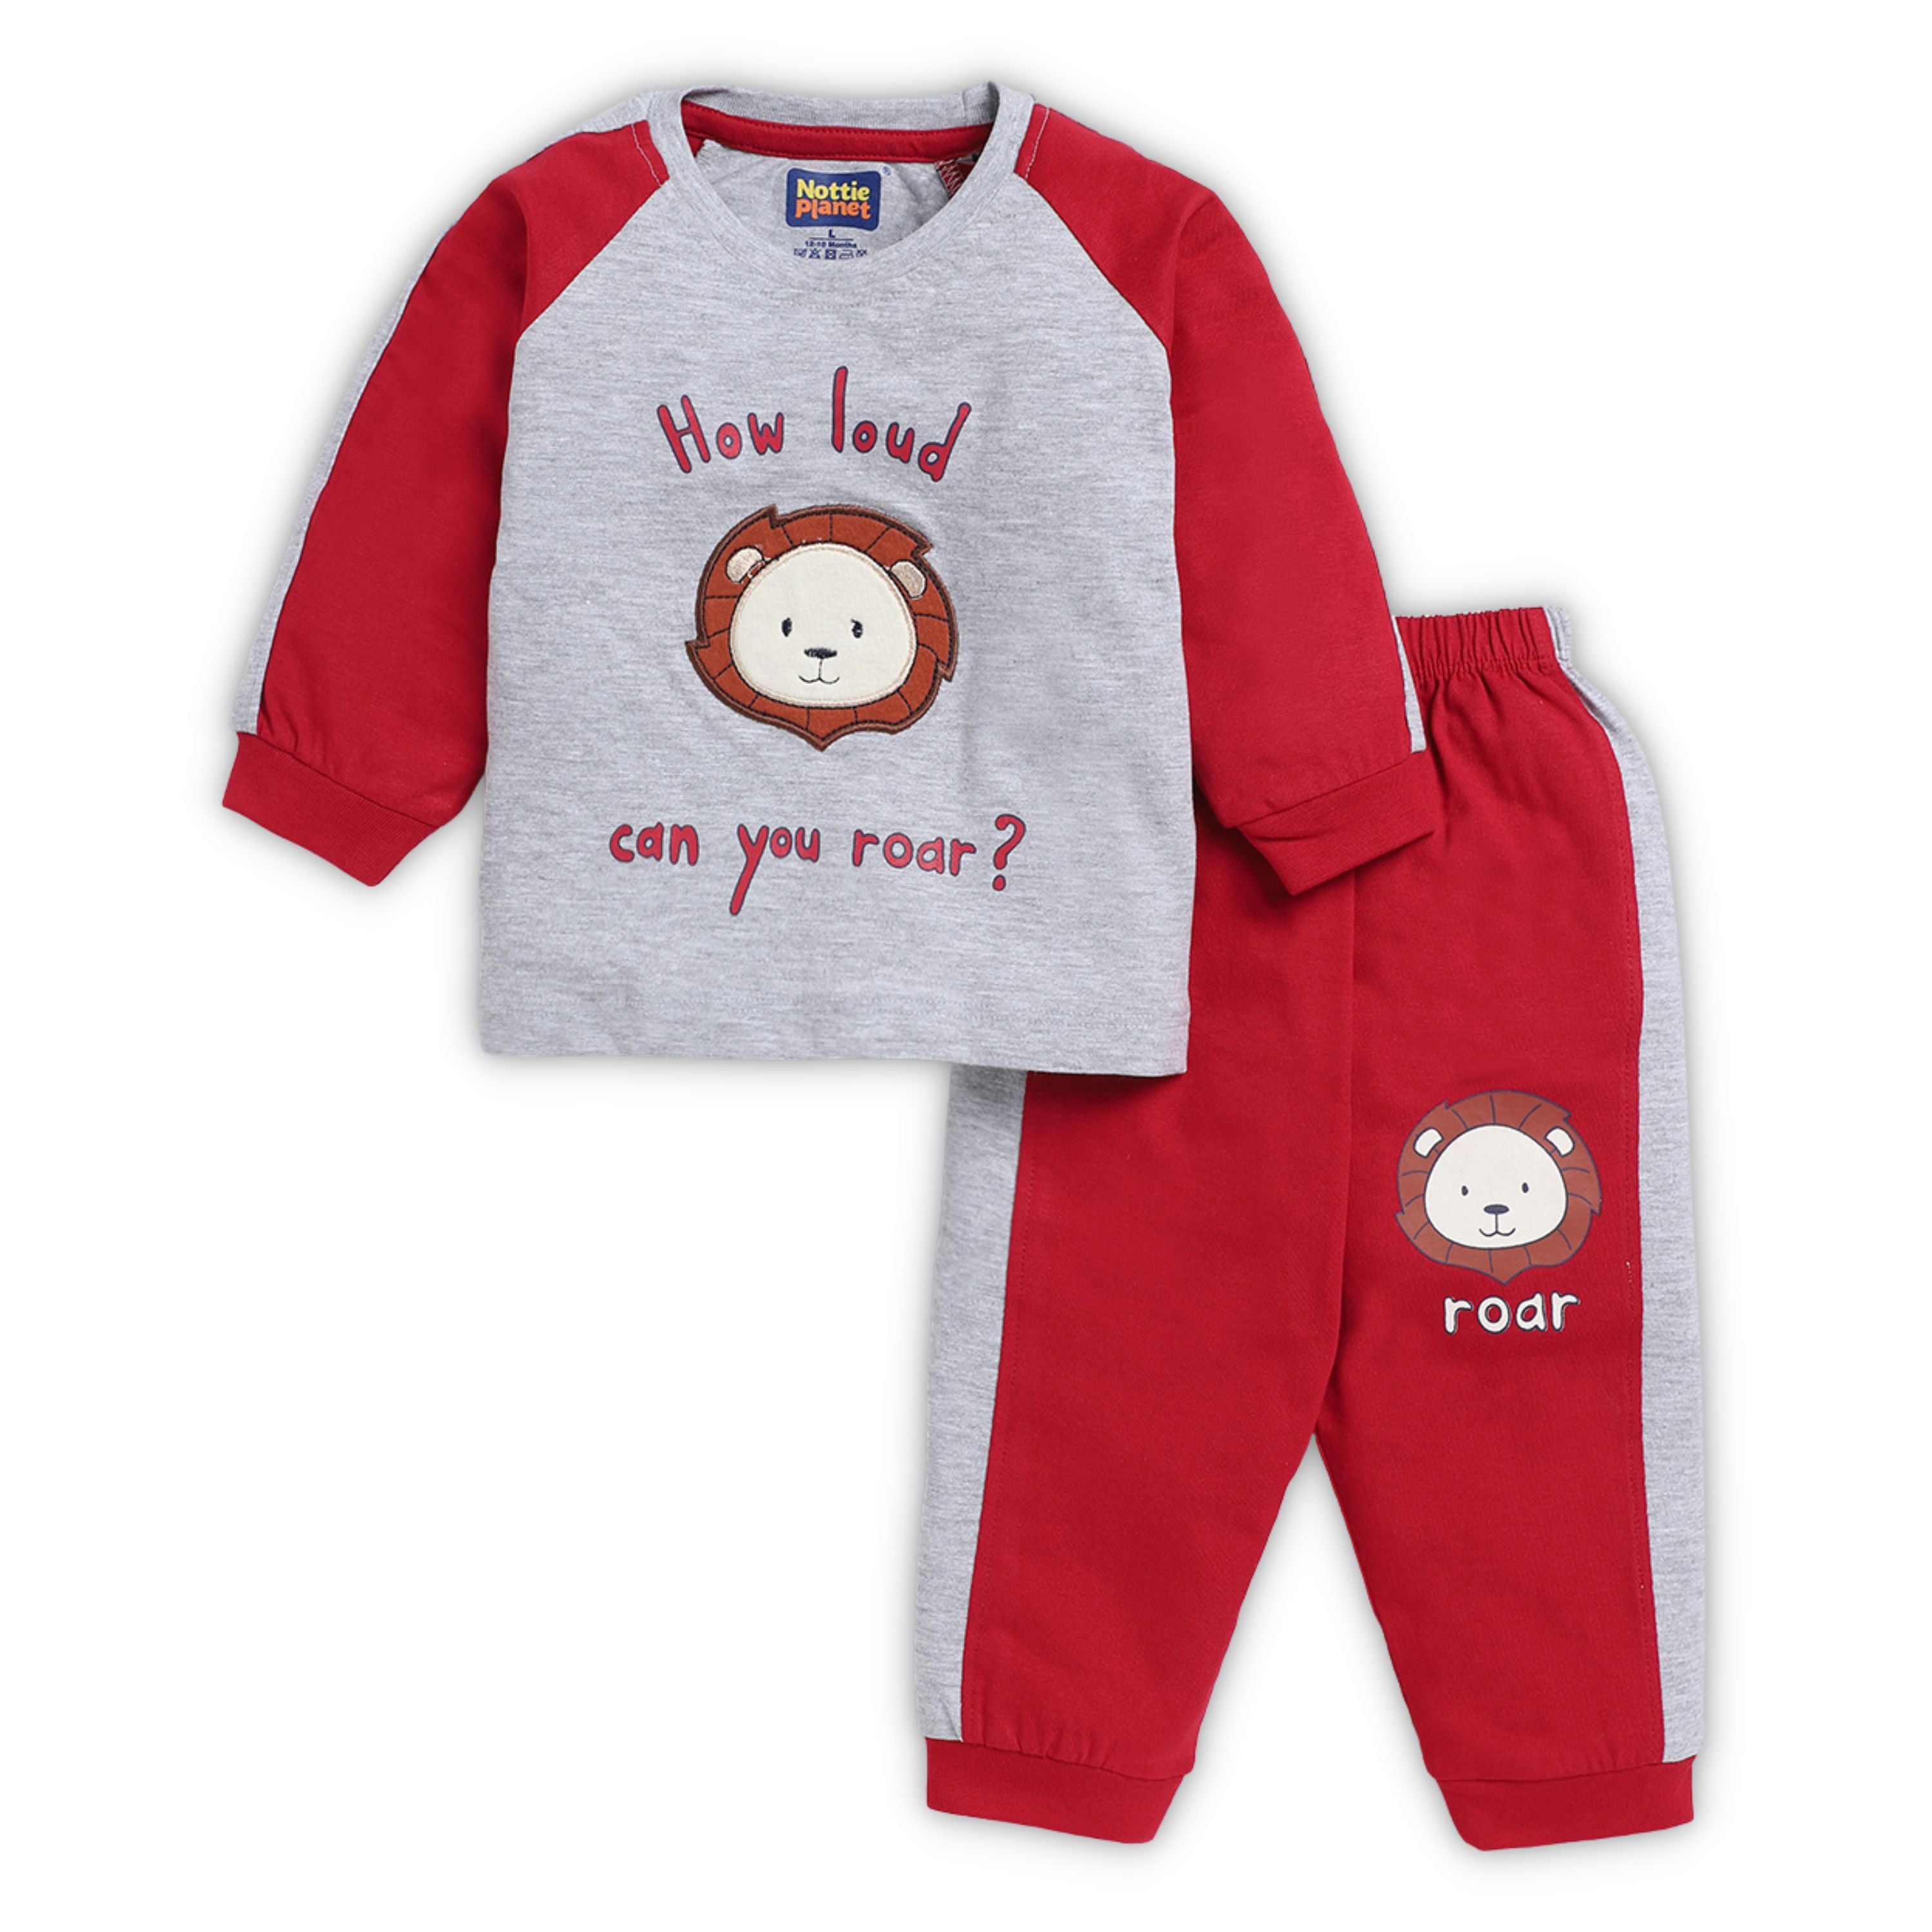 CLOTHING SET FOR BOY - RED